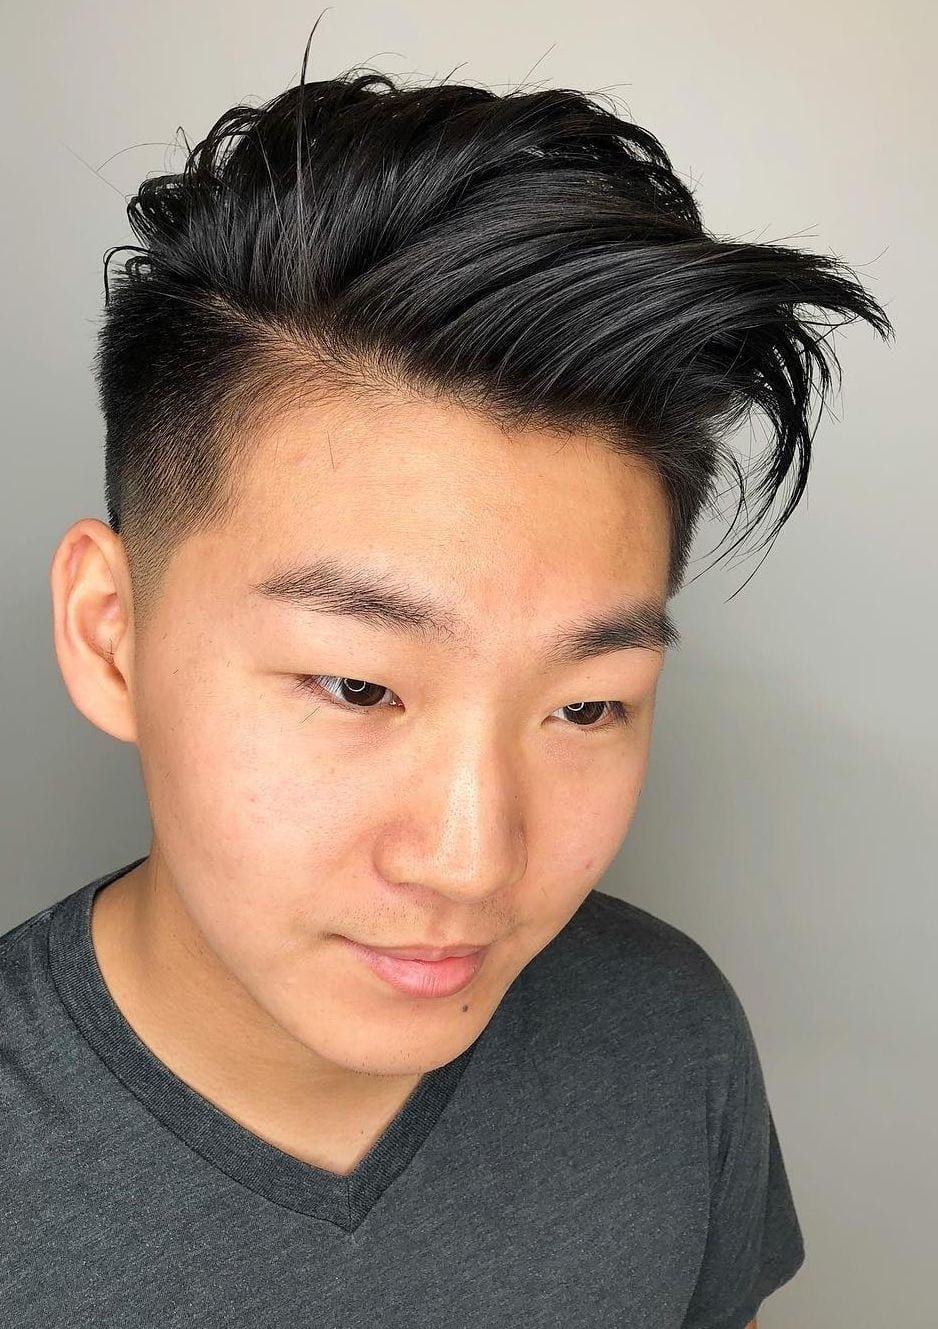 Top 30 Trendy Asian Men Hairstyles 2019 | Asian Men Hairstyle throughout Amazing Good Hairstyles For Asian Guys